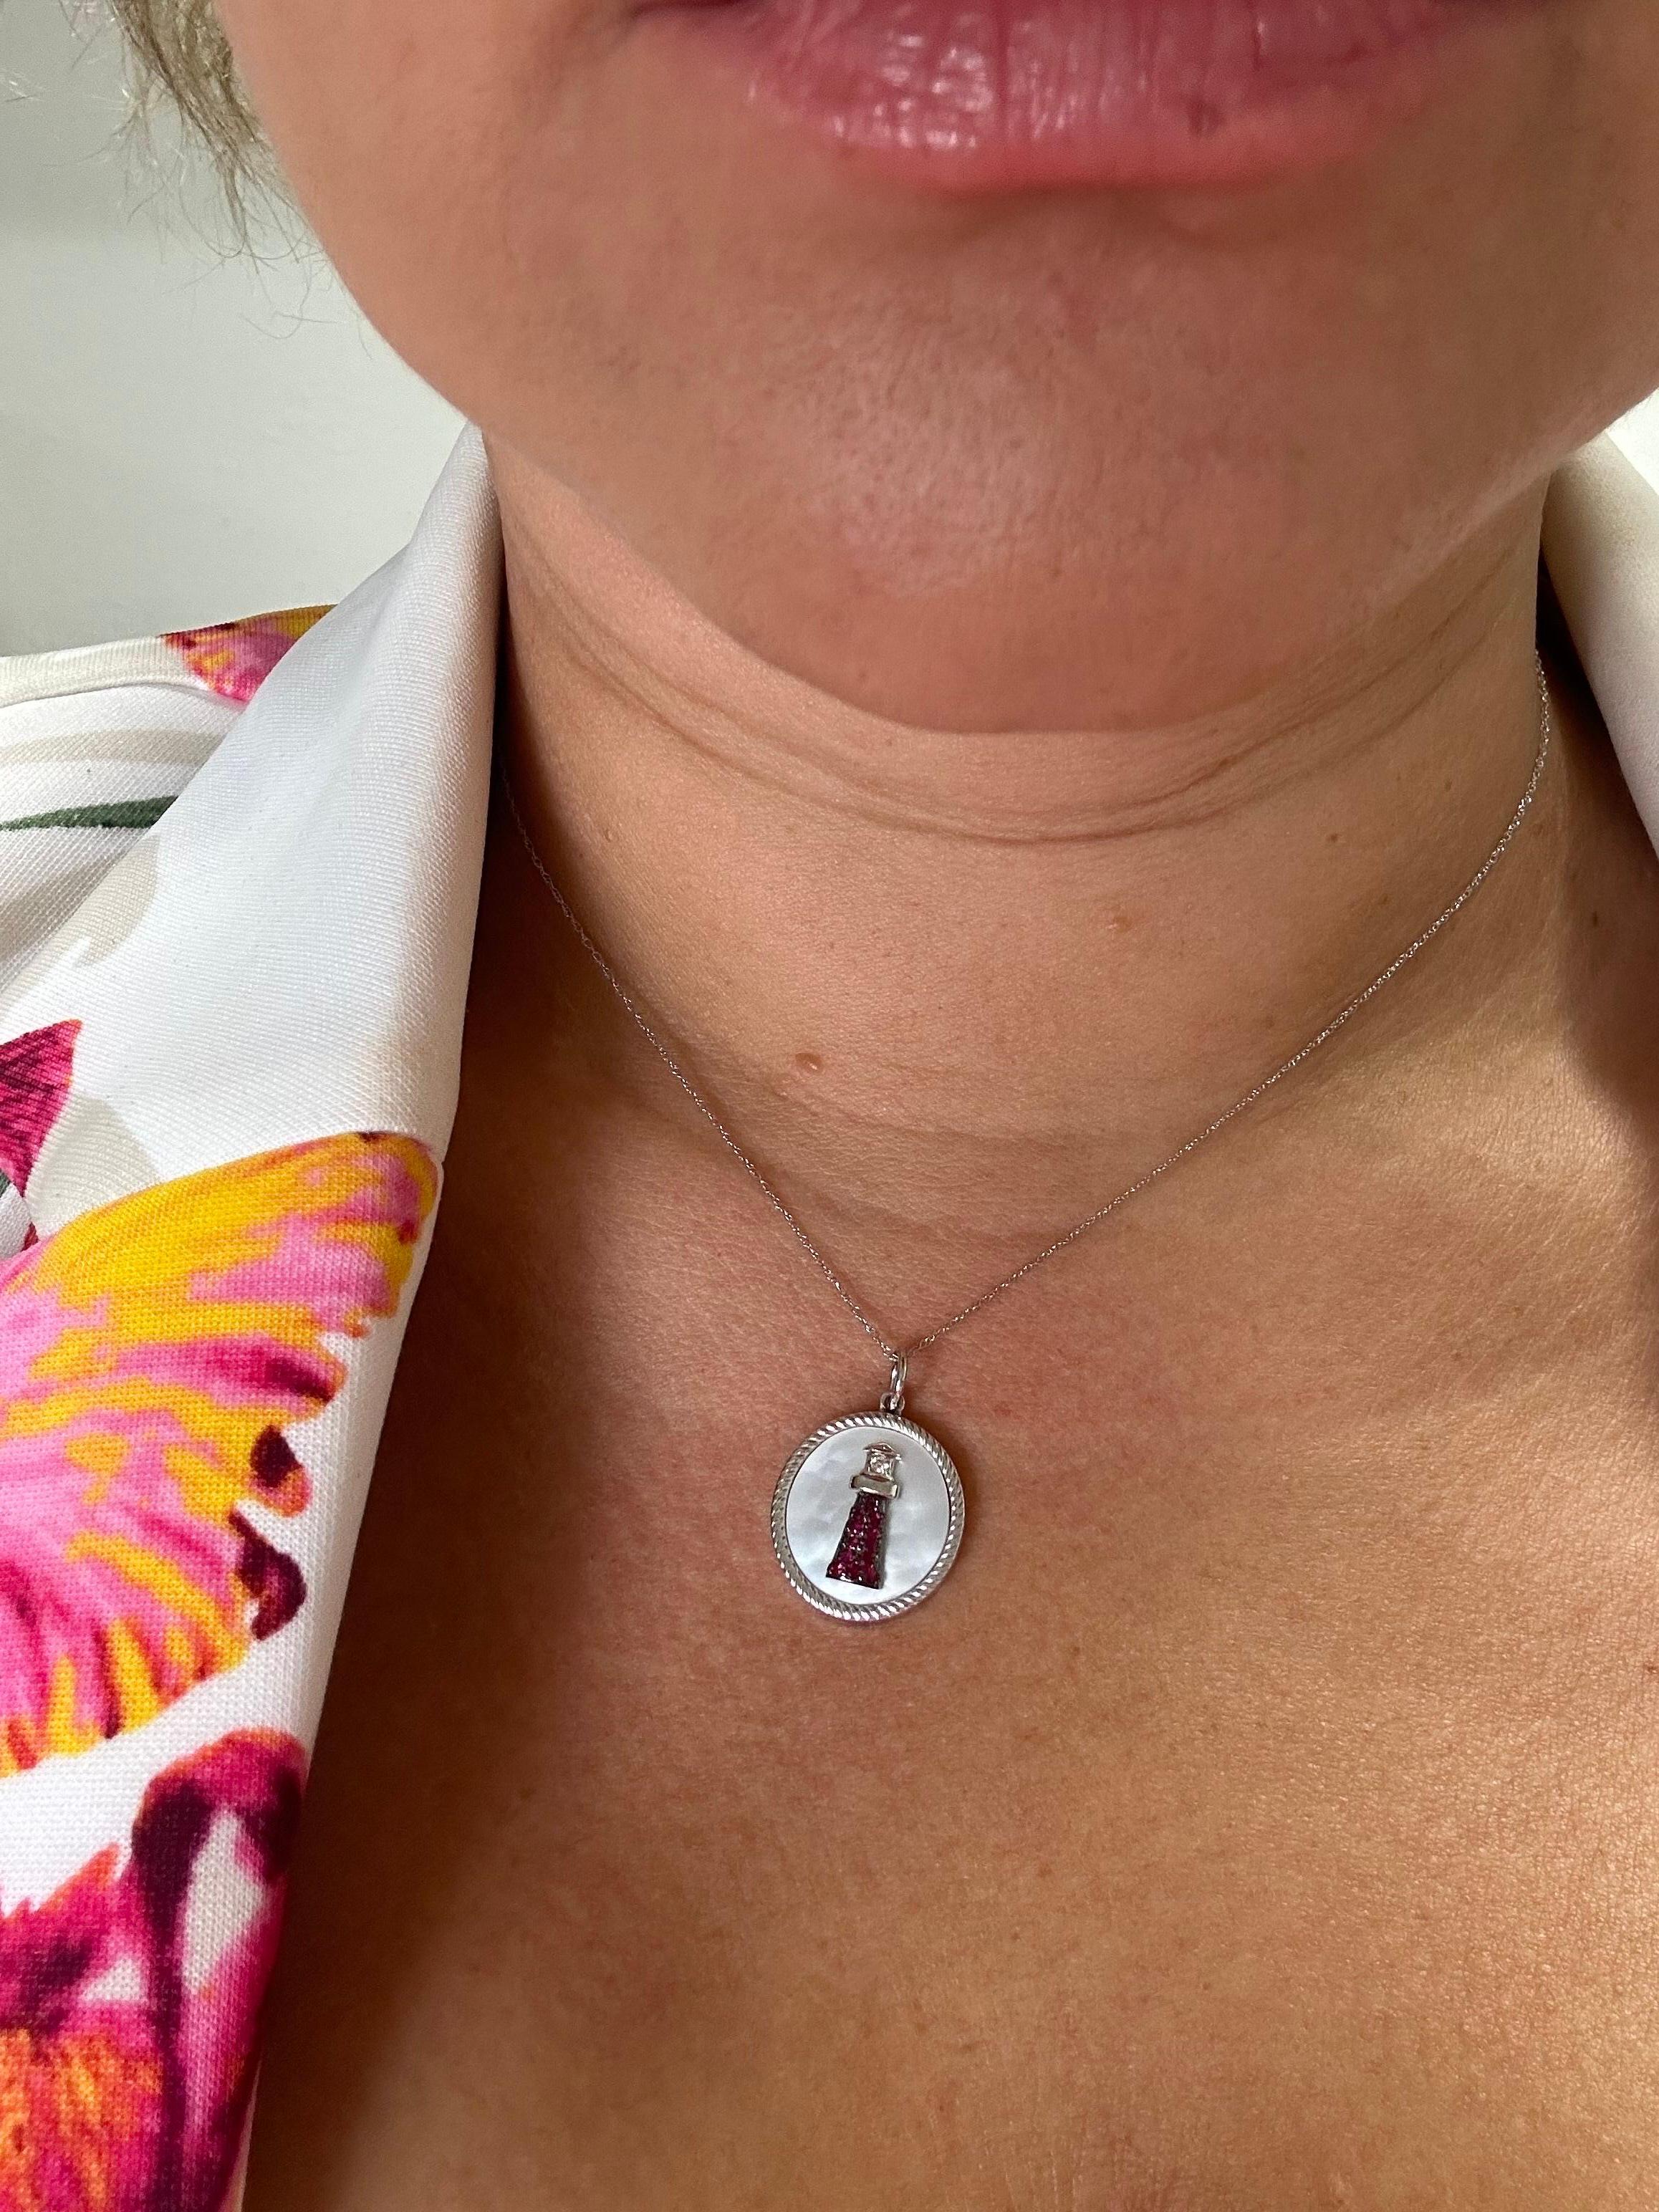 Stunning Lighthouse made with mother of pearl, diamonds and rubies!

METAL: 14KT
NATURAL DIAMOND(S)
Clarity/Color: VS/F-G
Cut: Round Brilliant
NATURAL RUBY(S)
Clarity/Color: VS/F-G
Cut: Round
Grams:4 
16000098


WHAT YOU GET AT STAMPAR